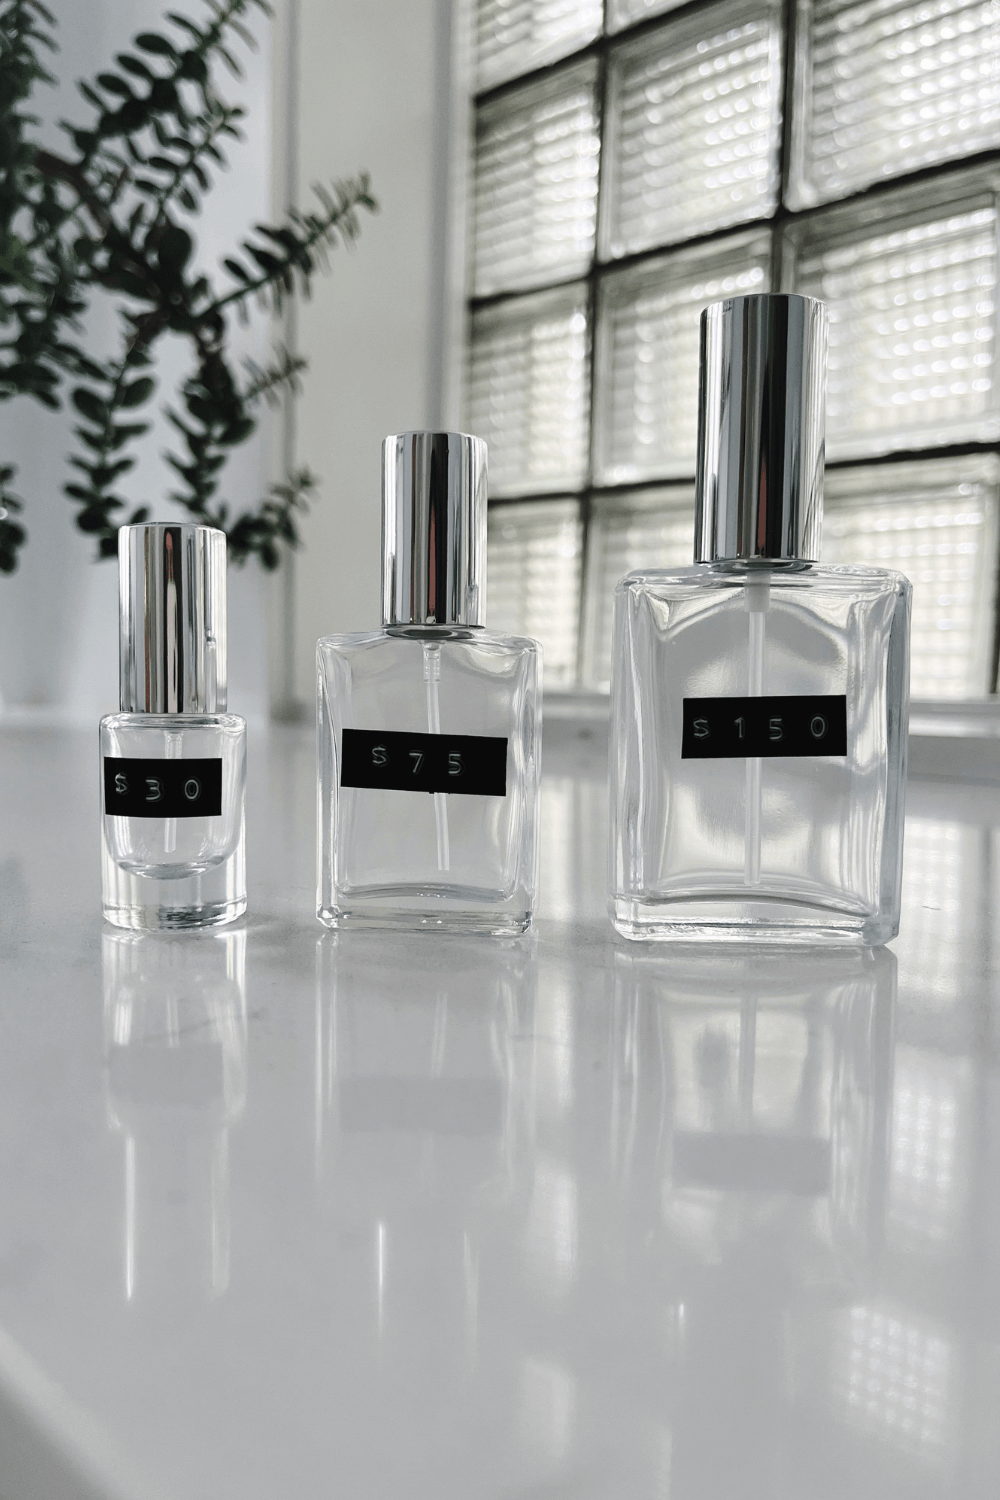 Build Your Own Scent: custom fragrance